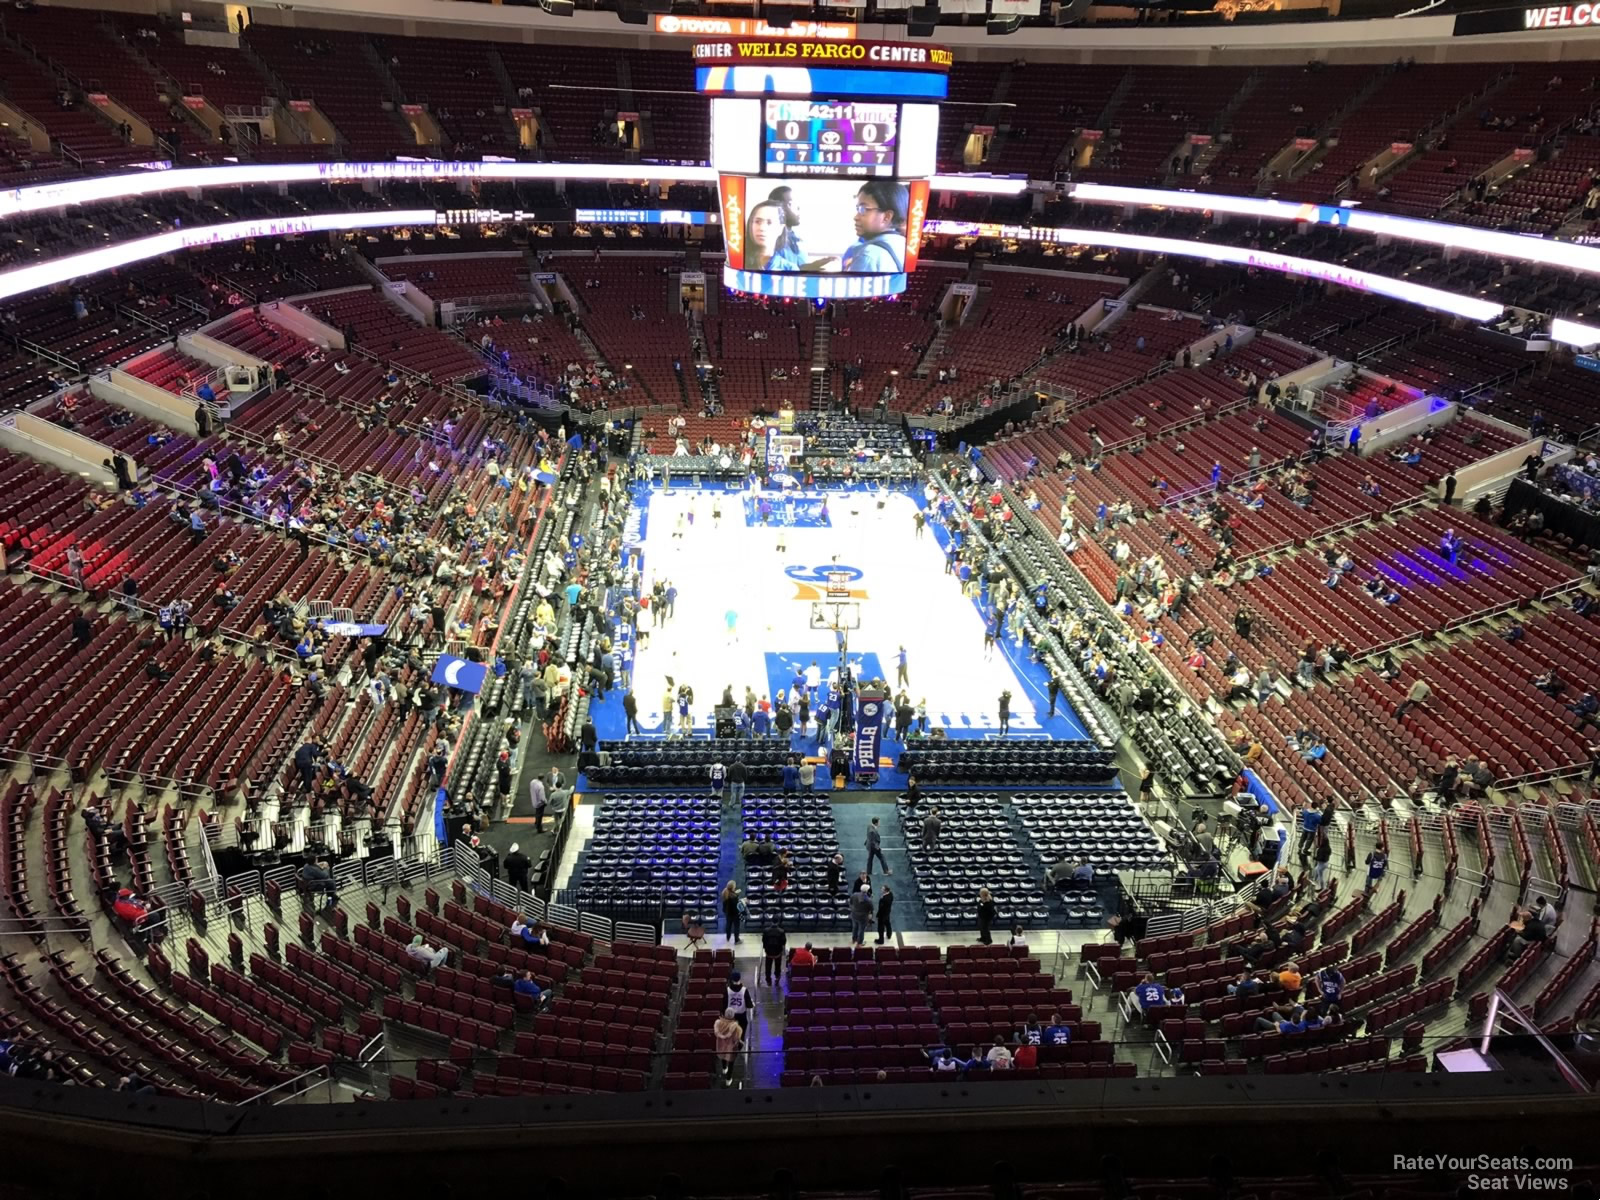 section 207, row 7 seat view  for basketball - wells fargo center